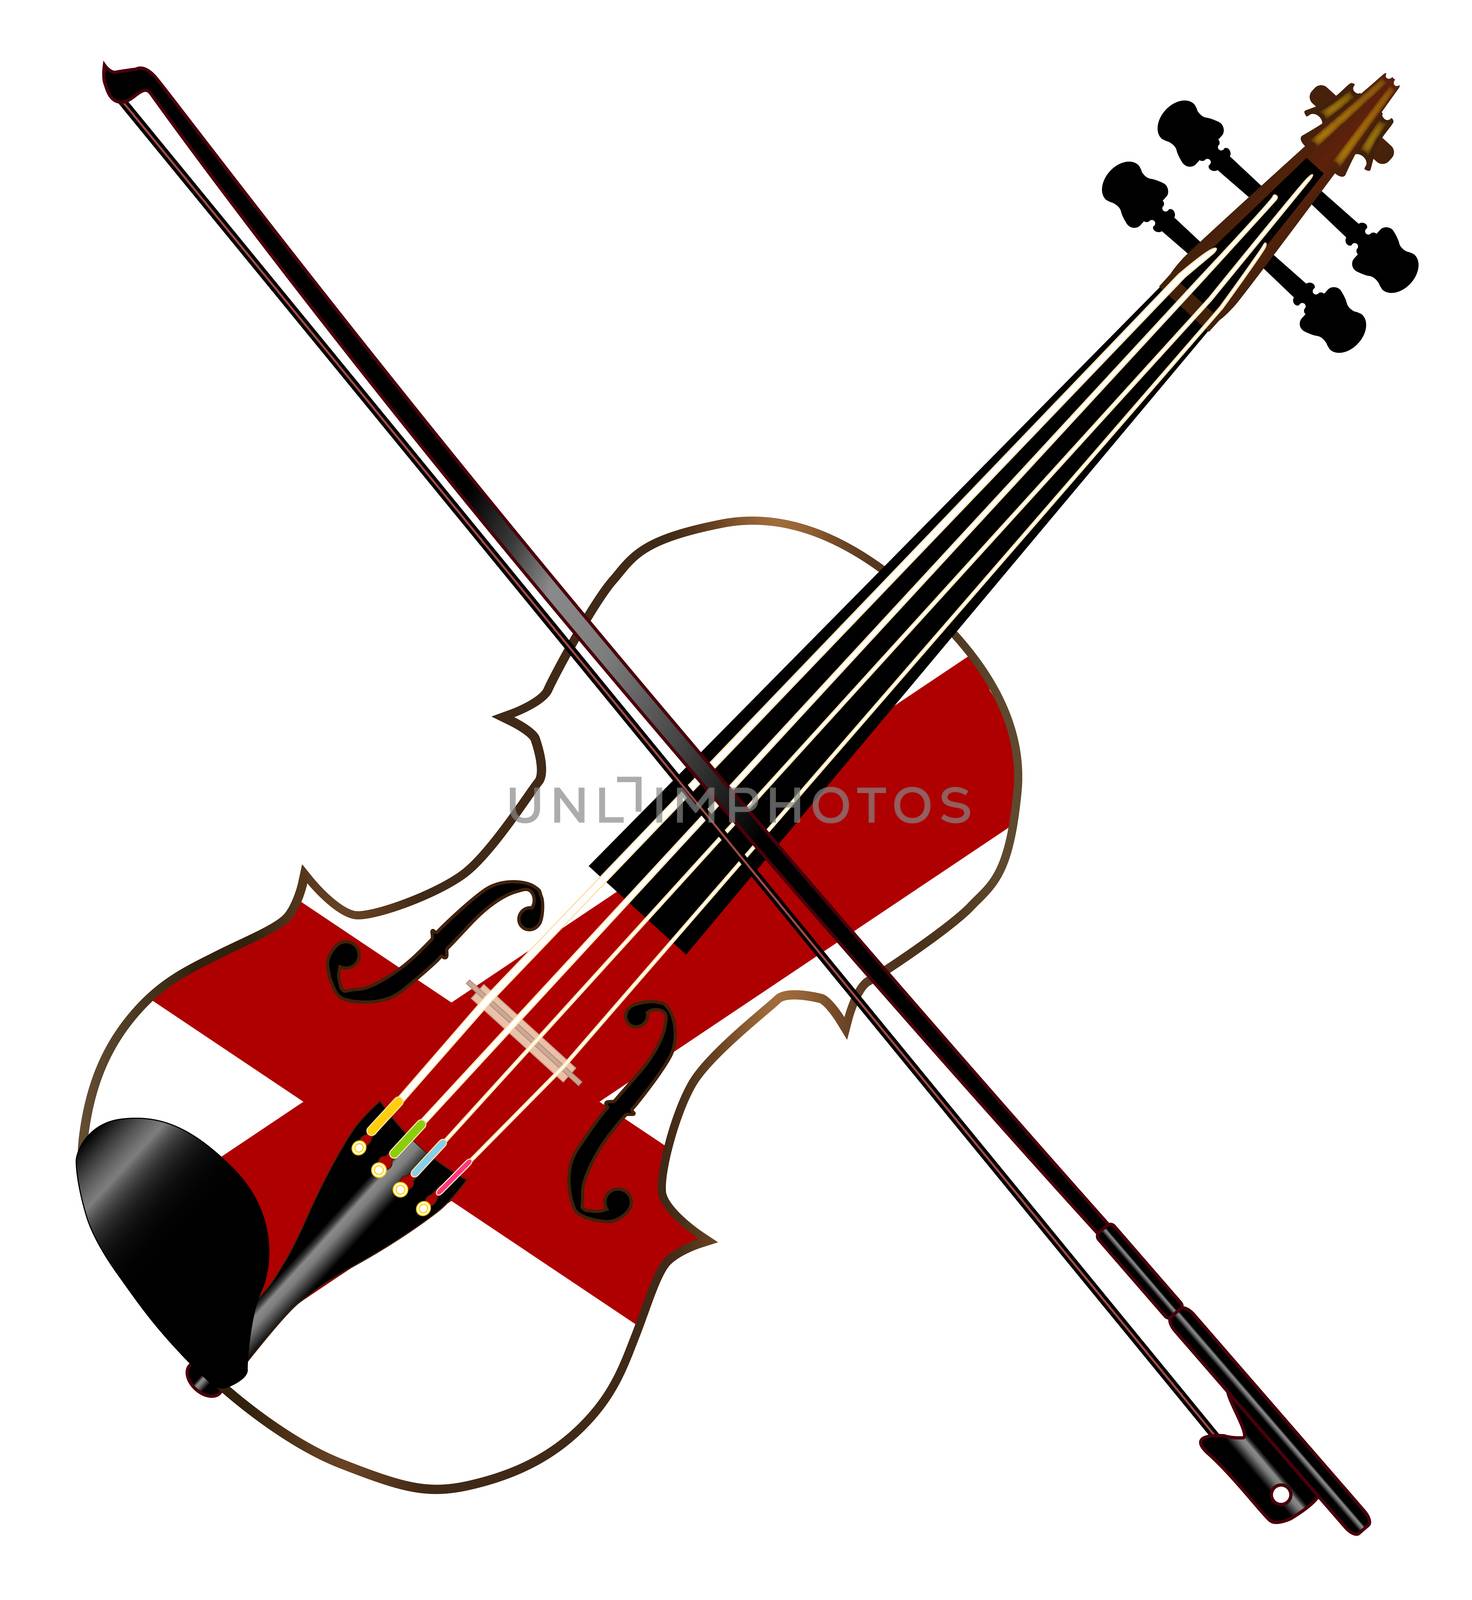 A typical violin with Alabama state flag and bow isolated over a white background